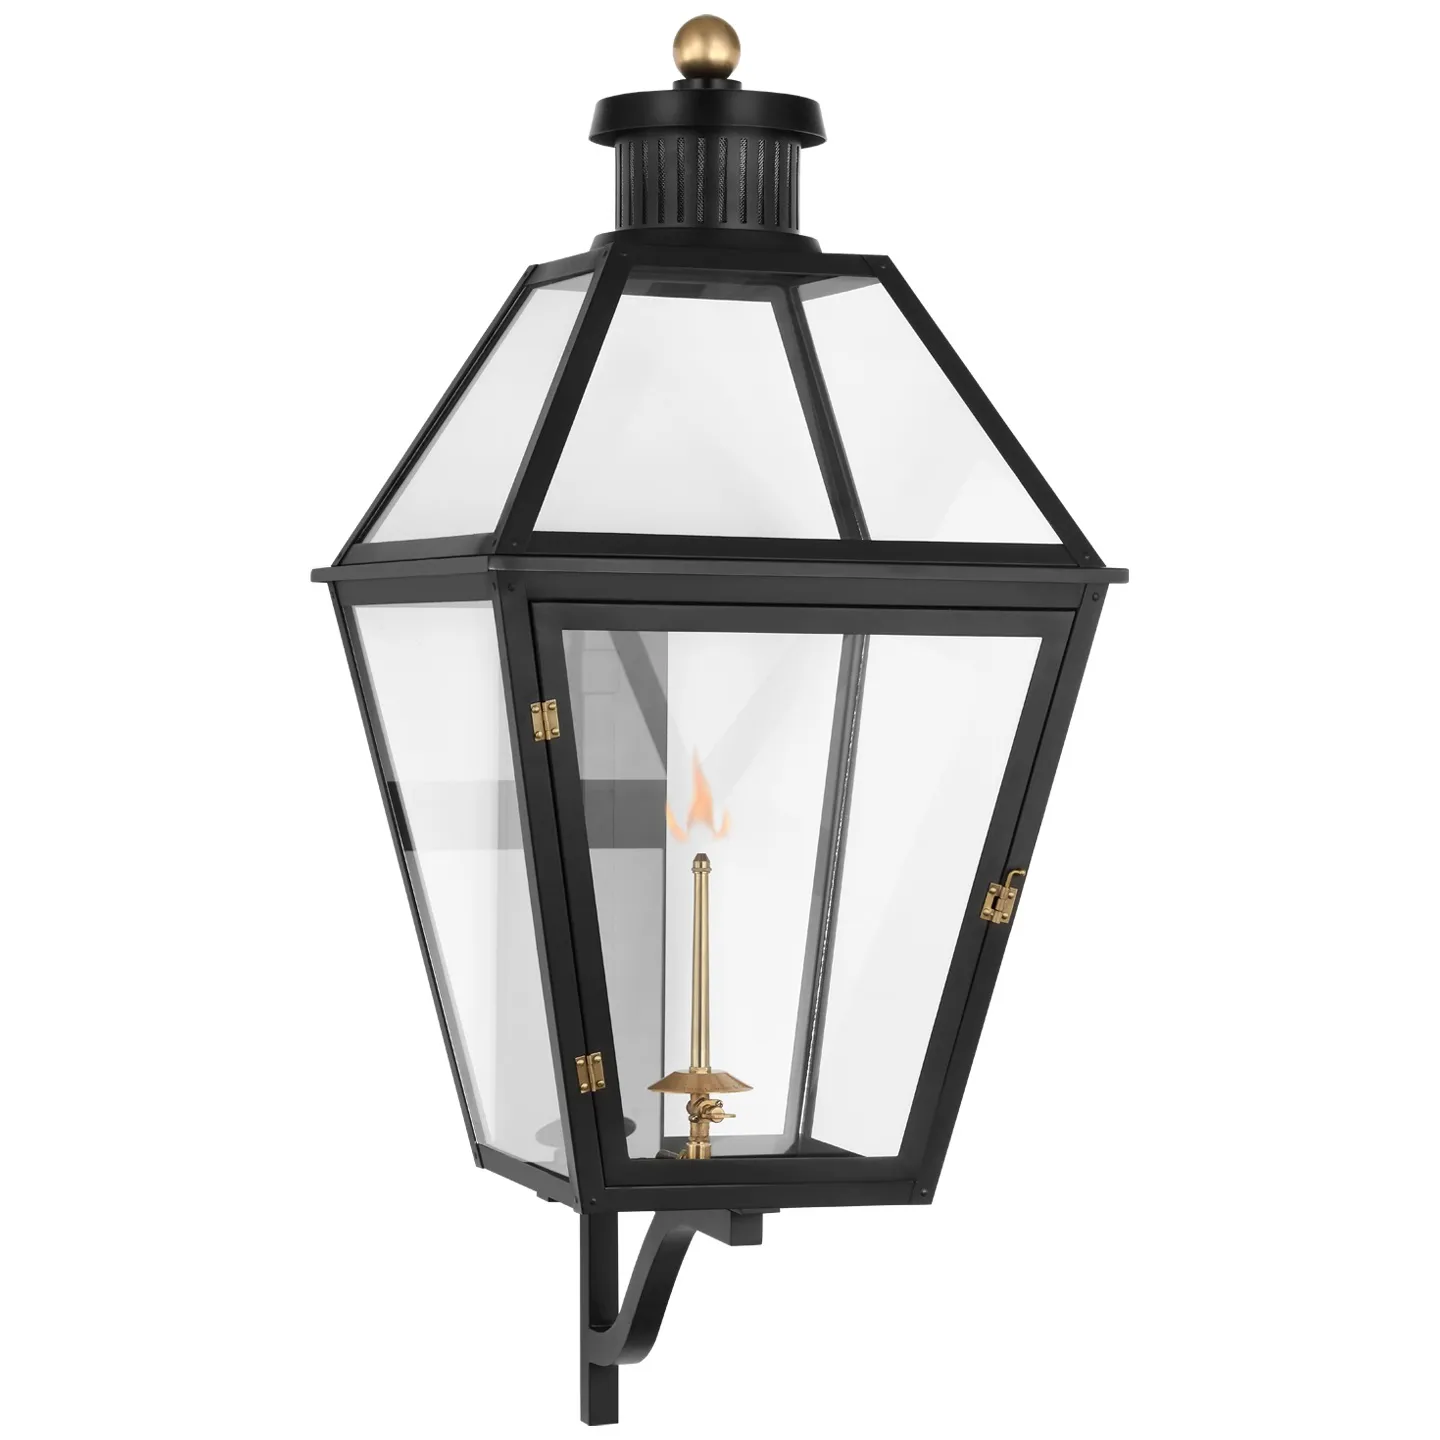 Stratford XL Bracketed Gas Wall Lantern in Matte Black with Clear Glass